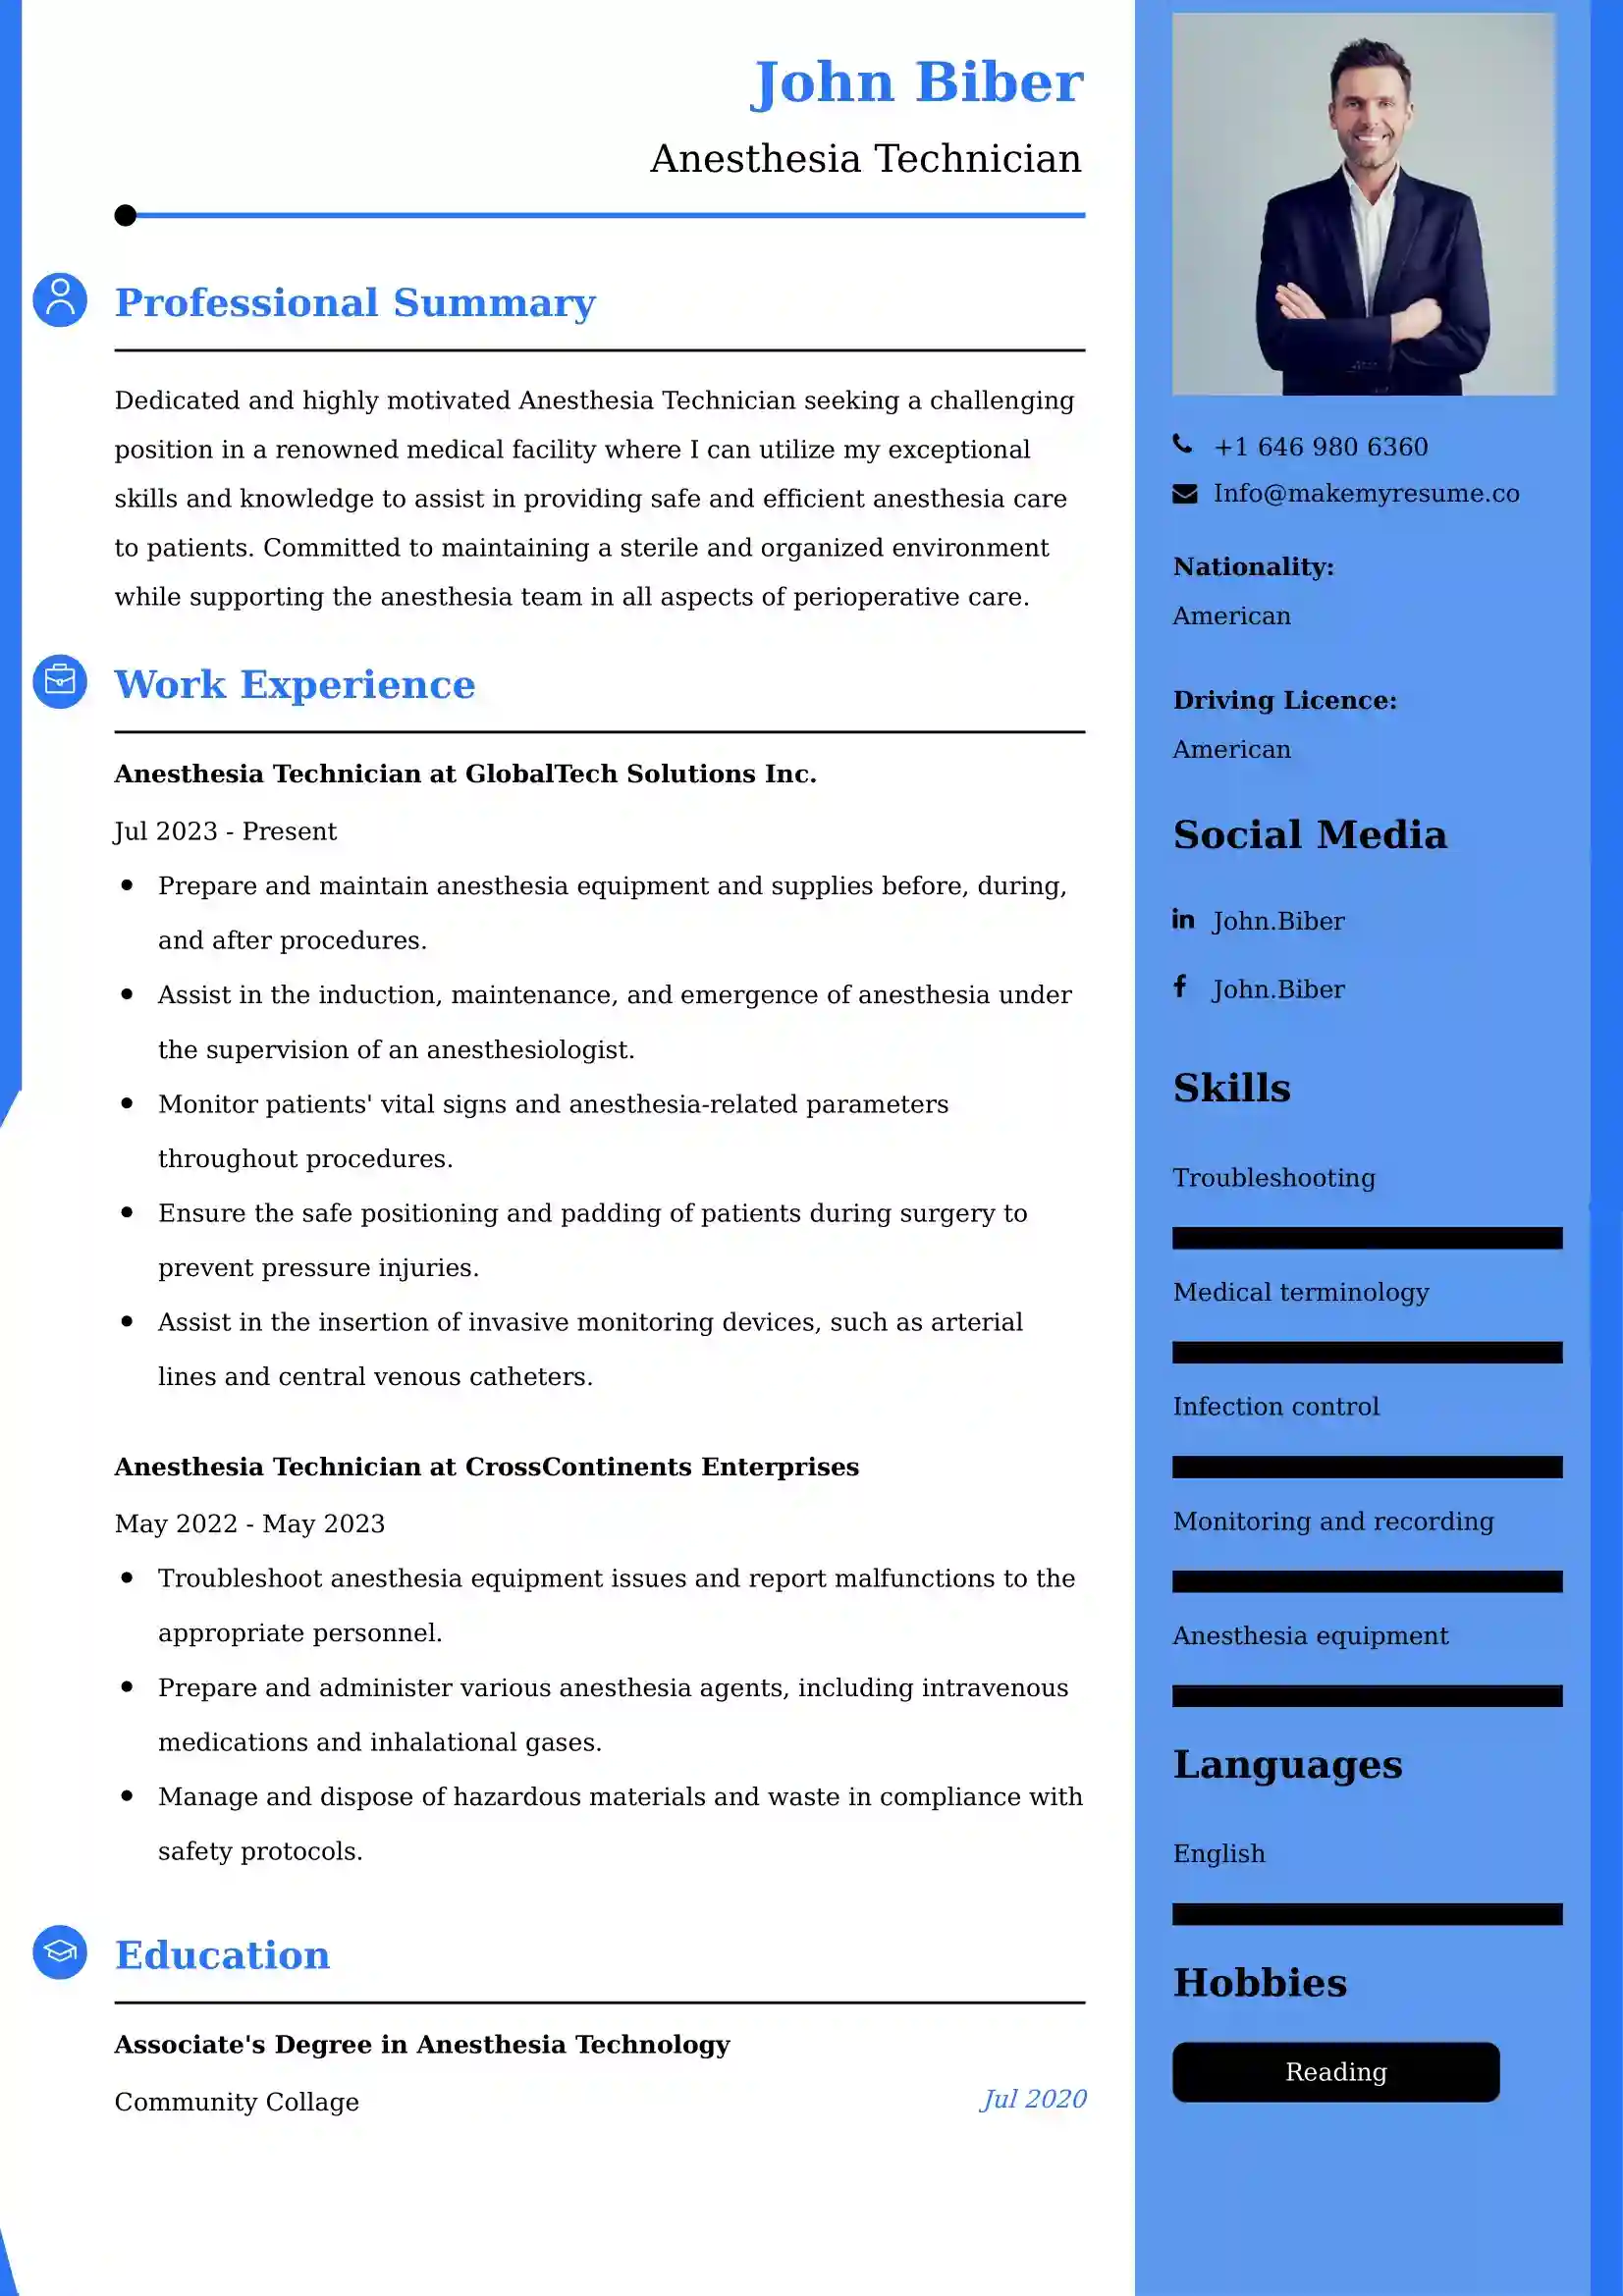 Best Clinical Director Resume Examples for UK